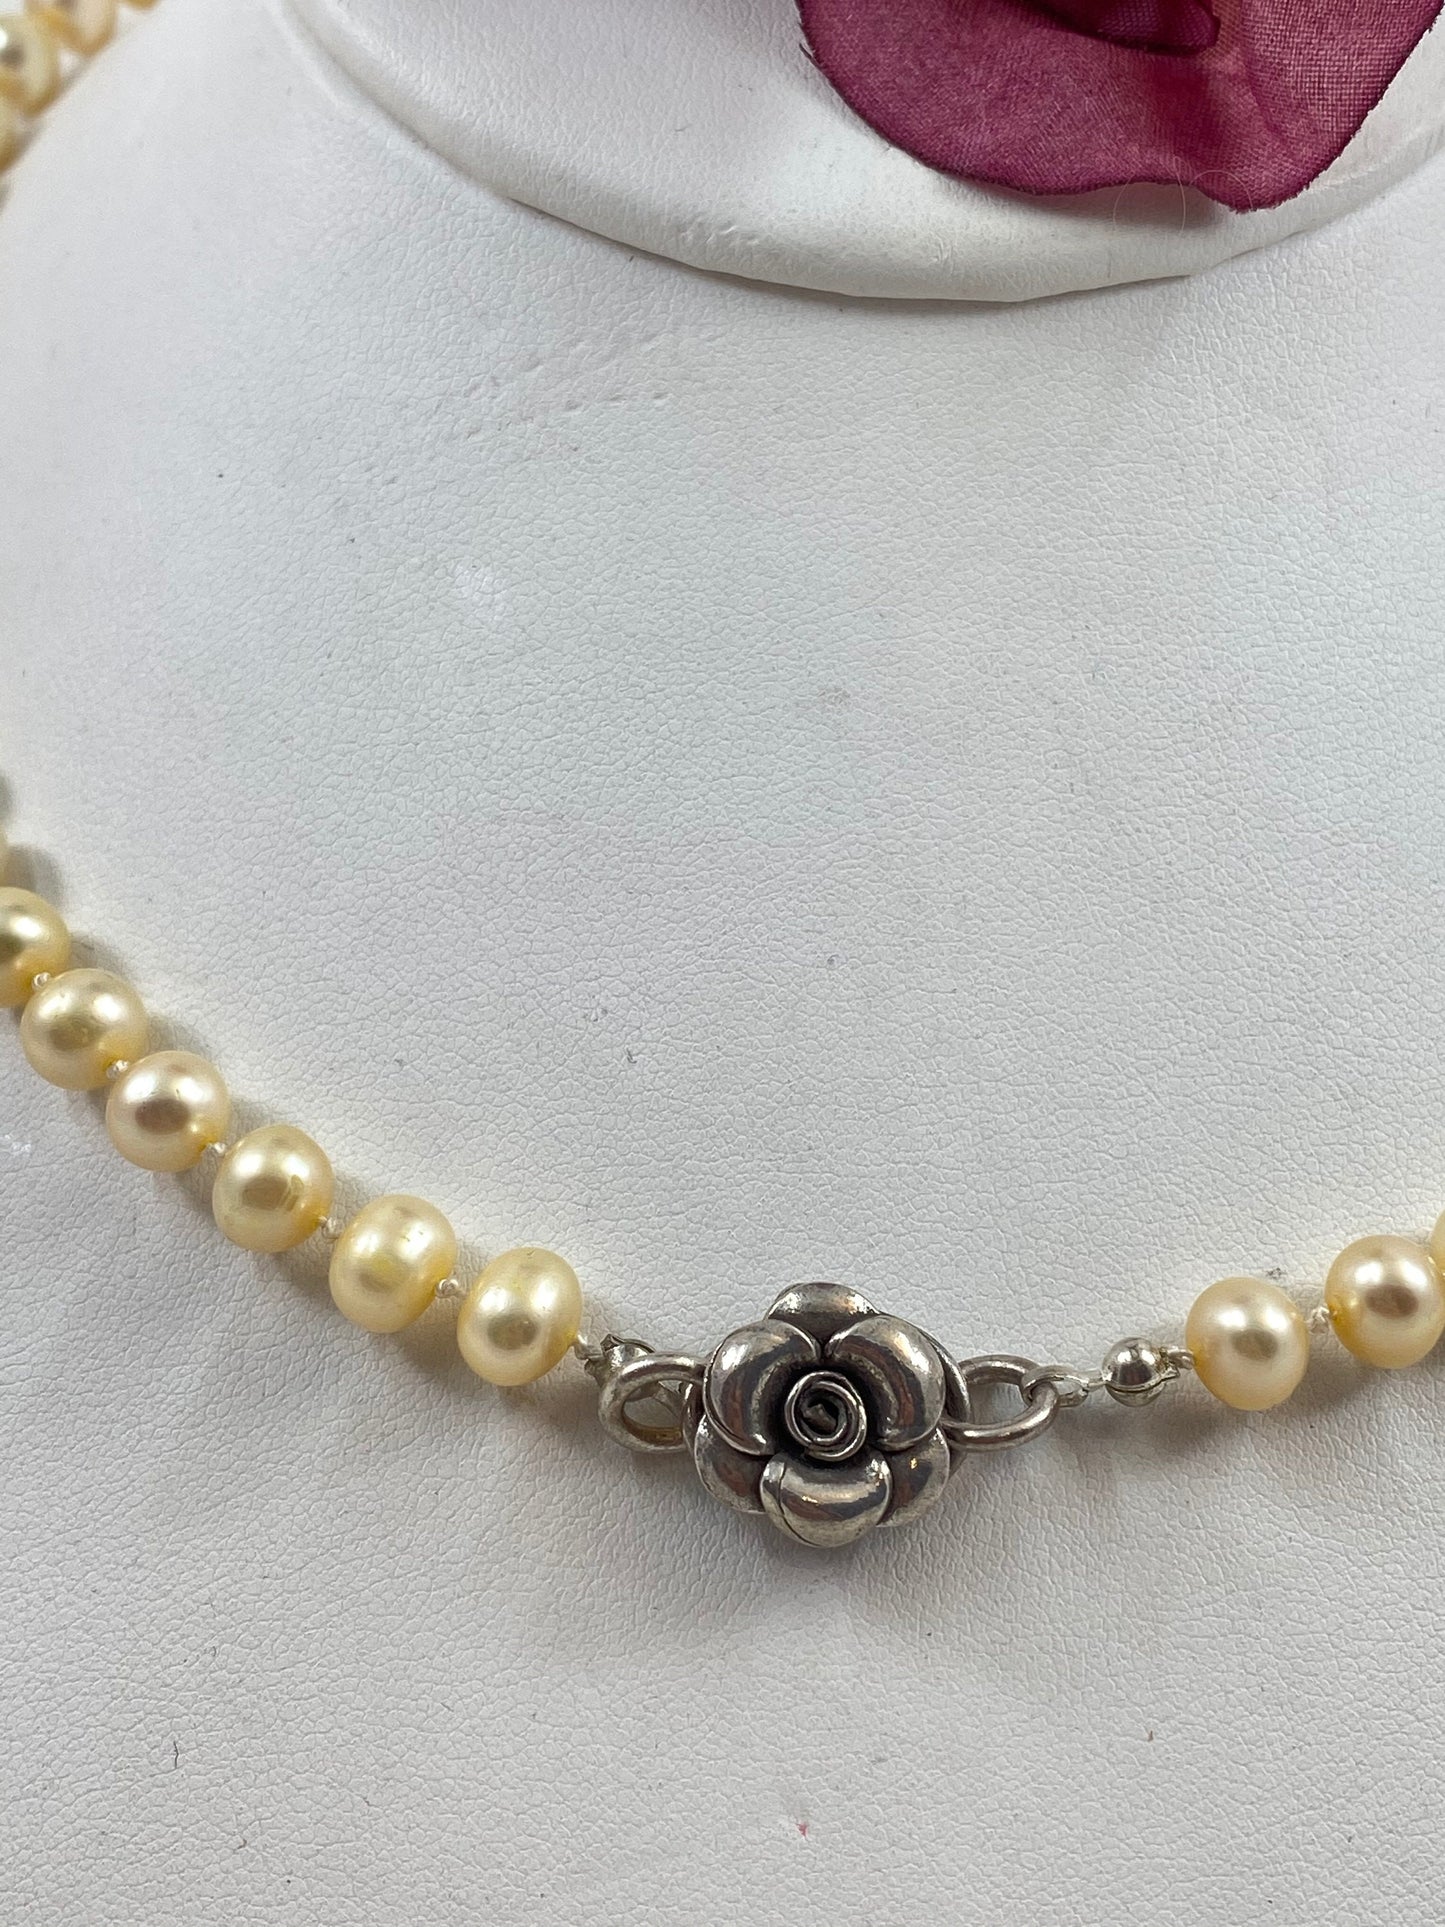 Gorgeous soft butter yellow knotted fresh water pearl necklace. The necklace is finished with a Thai sterling silver flower clasp.